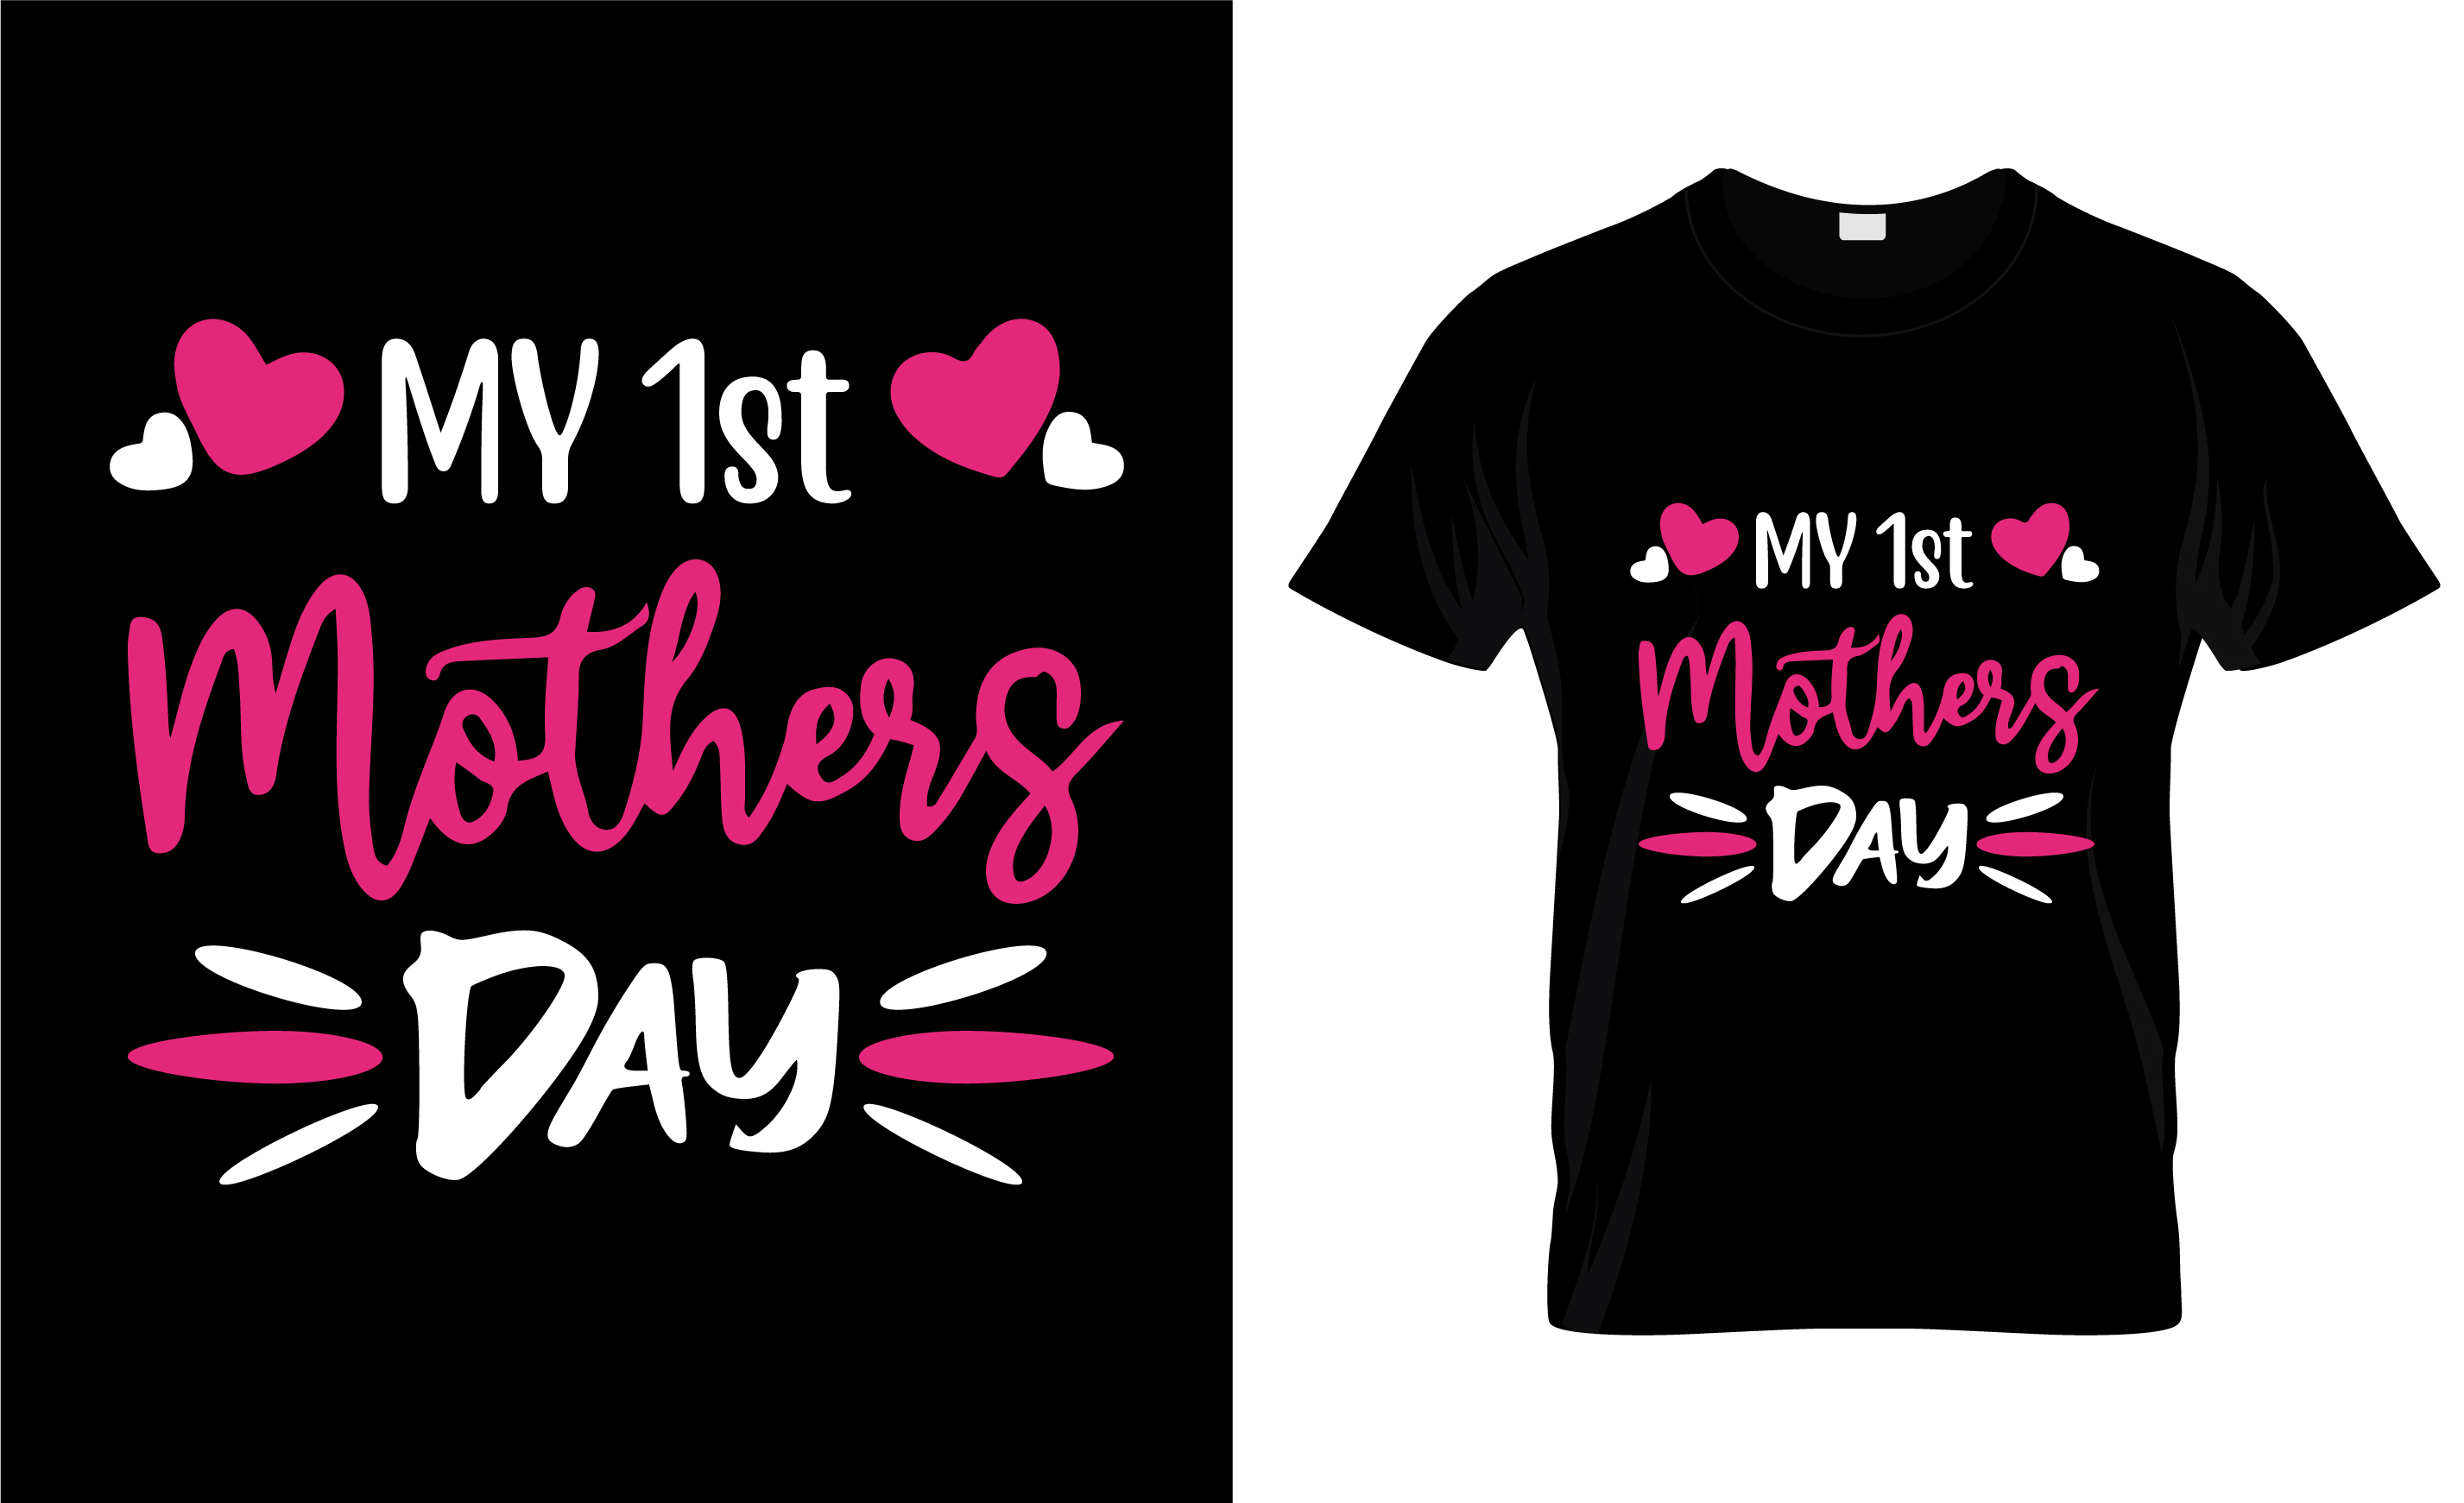 Image of a black t-shirt with a colorful print in red and white about mom.